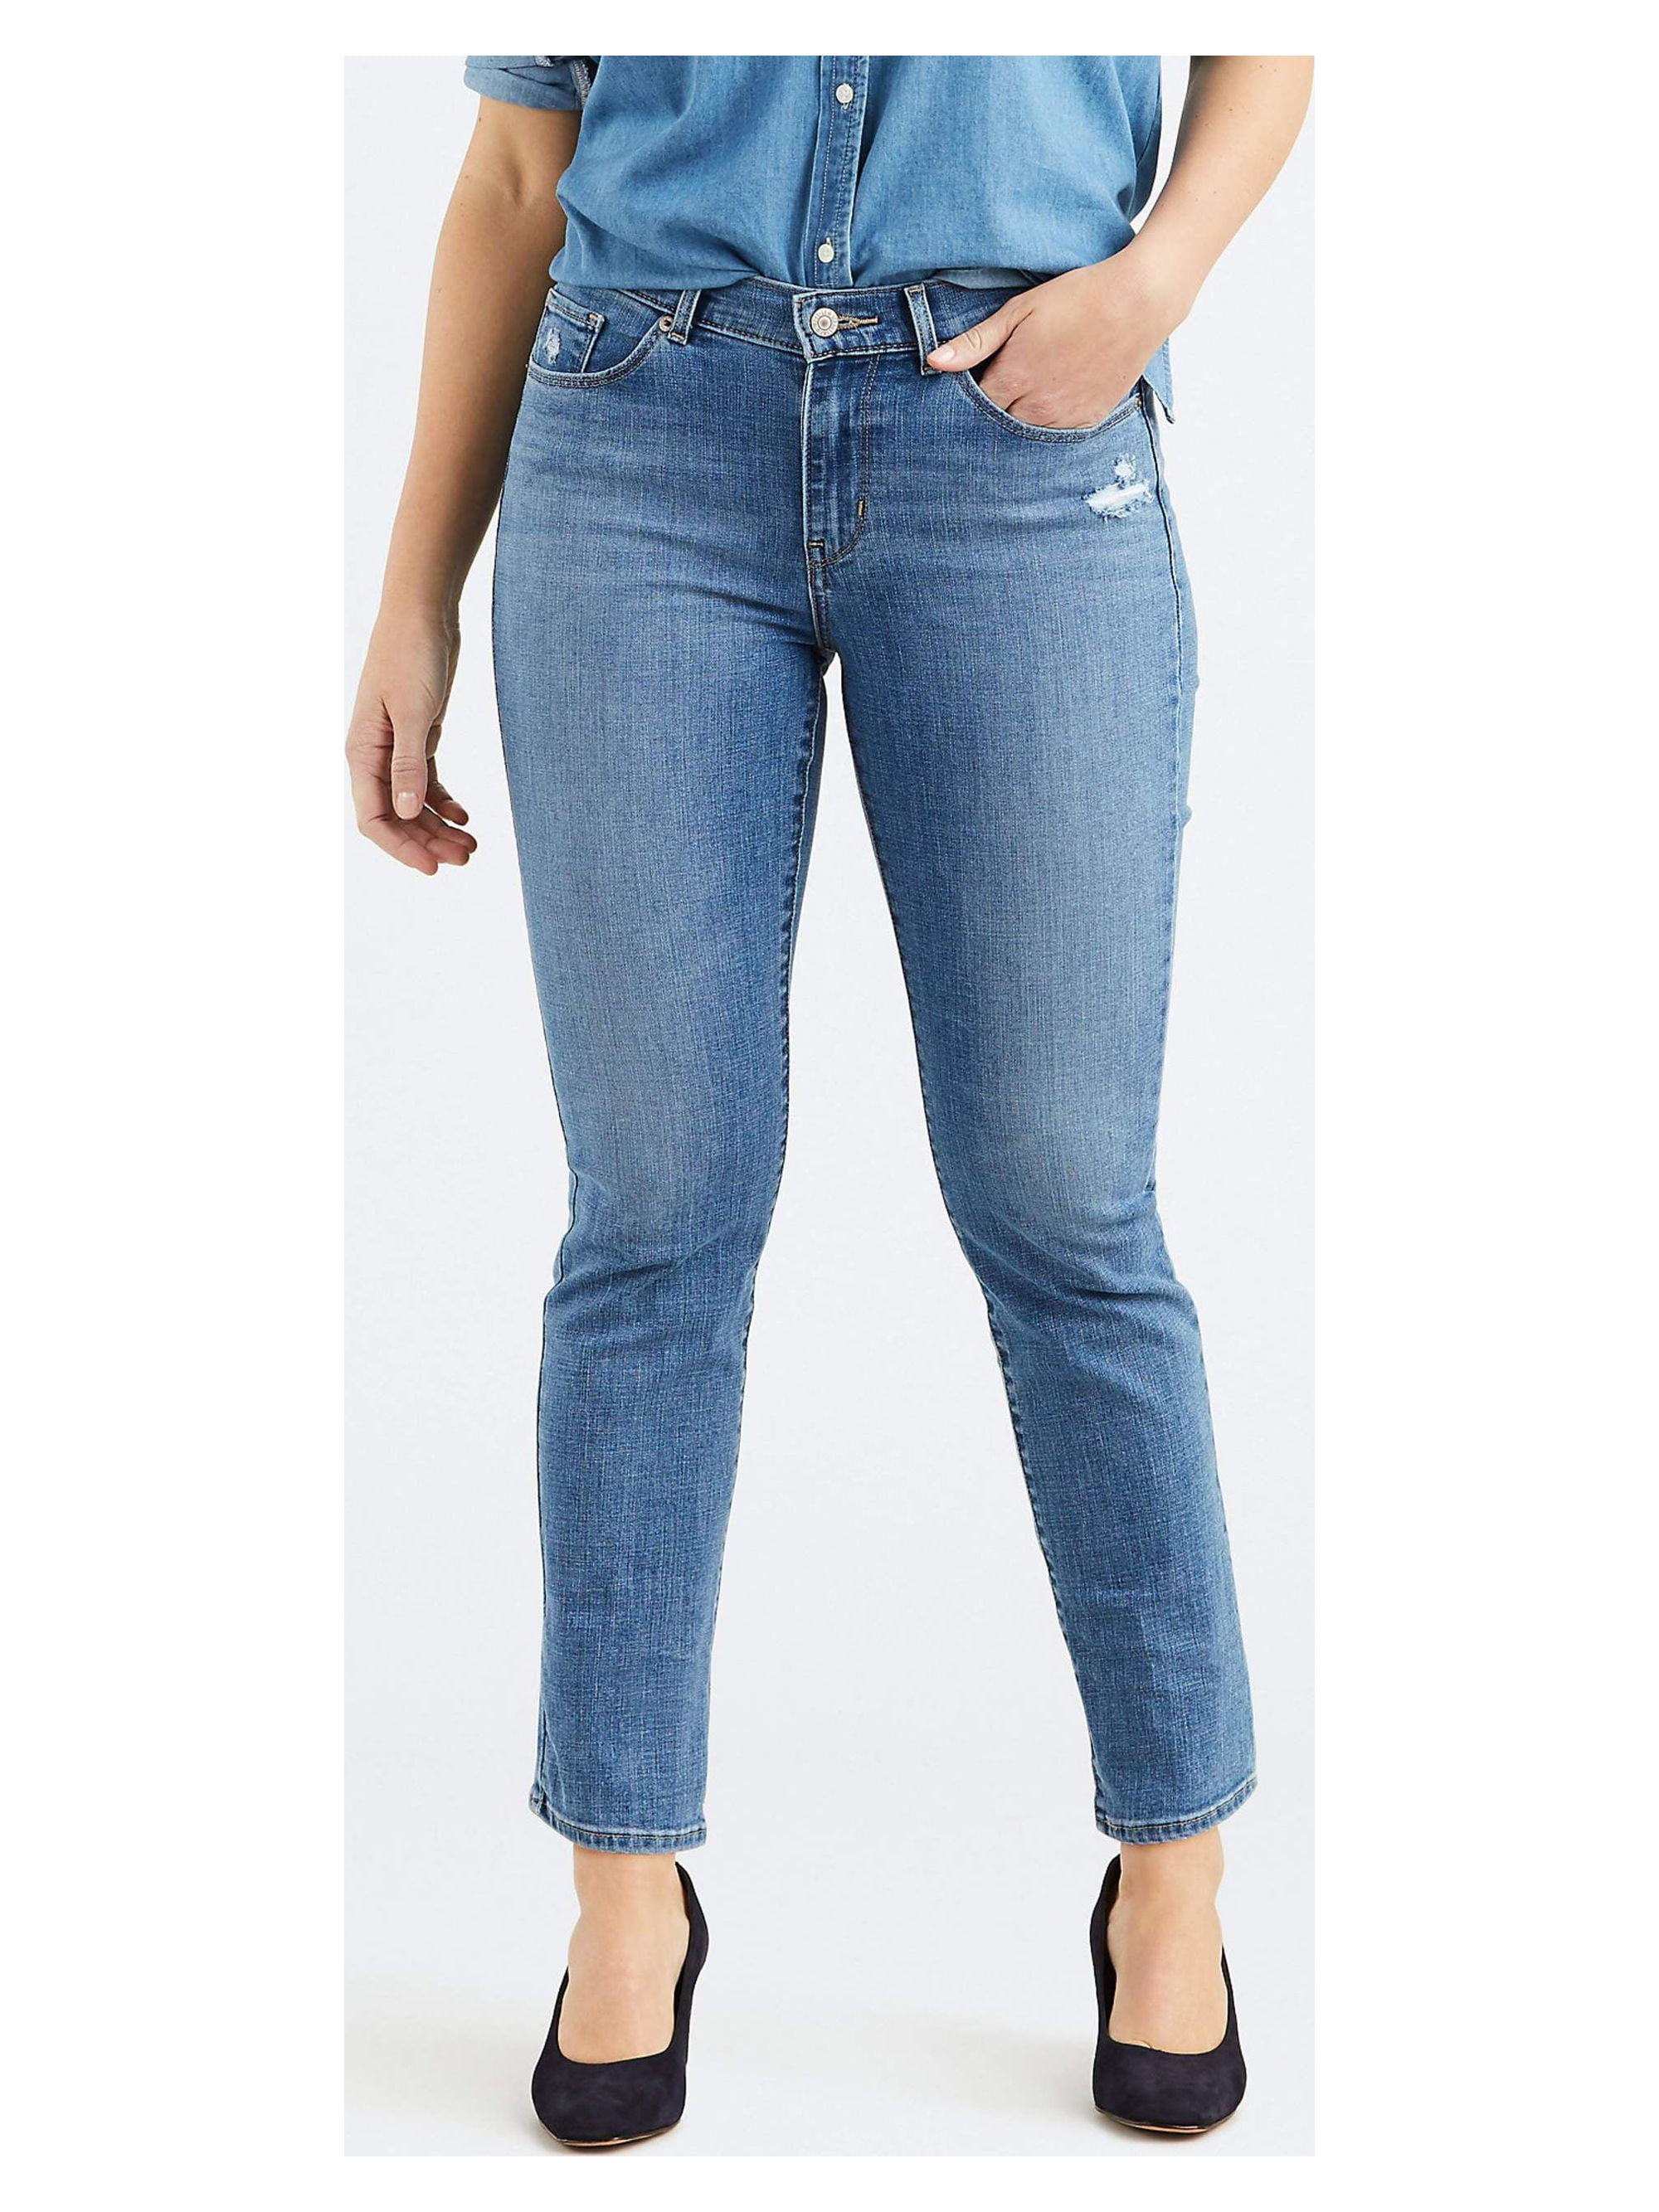 Jeans - Redbat Denim Ladies Straight Leg Jeans with Side Chain - From  Sportscene was listed for R499.00 on 27 Nov at 23:46 by Dealz 4 All in Cape  Town (ID:574029814)